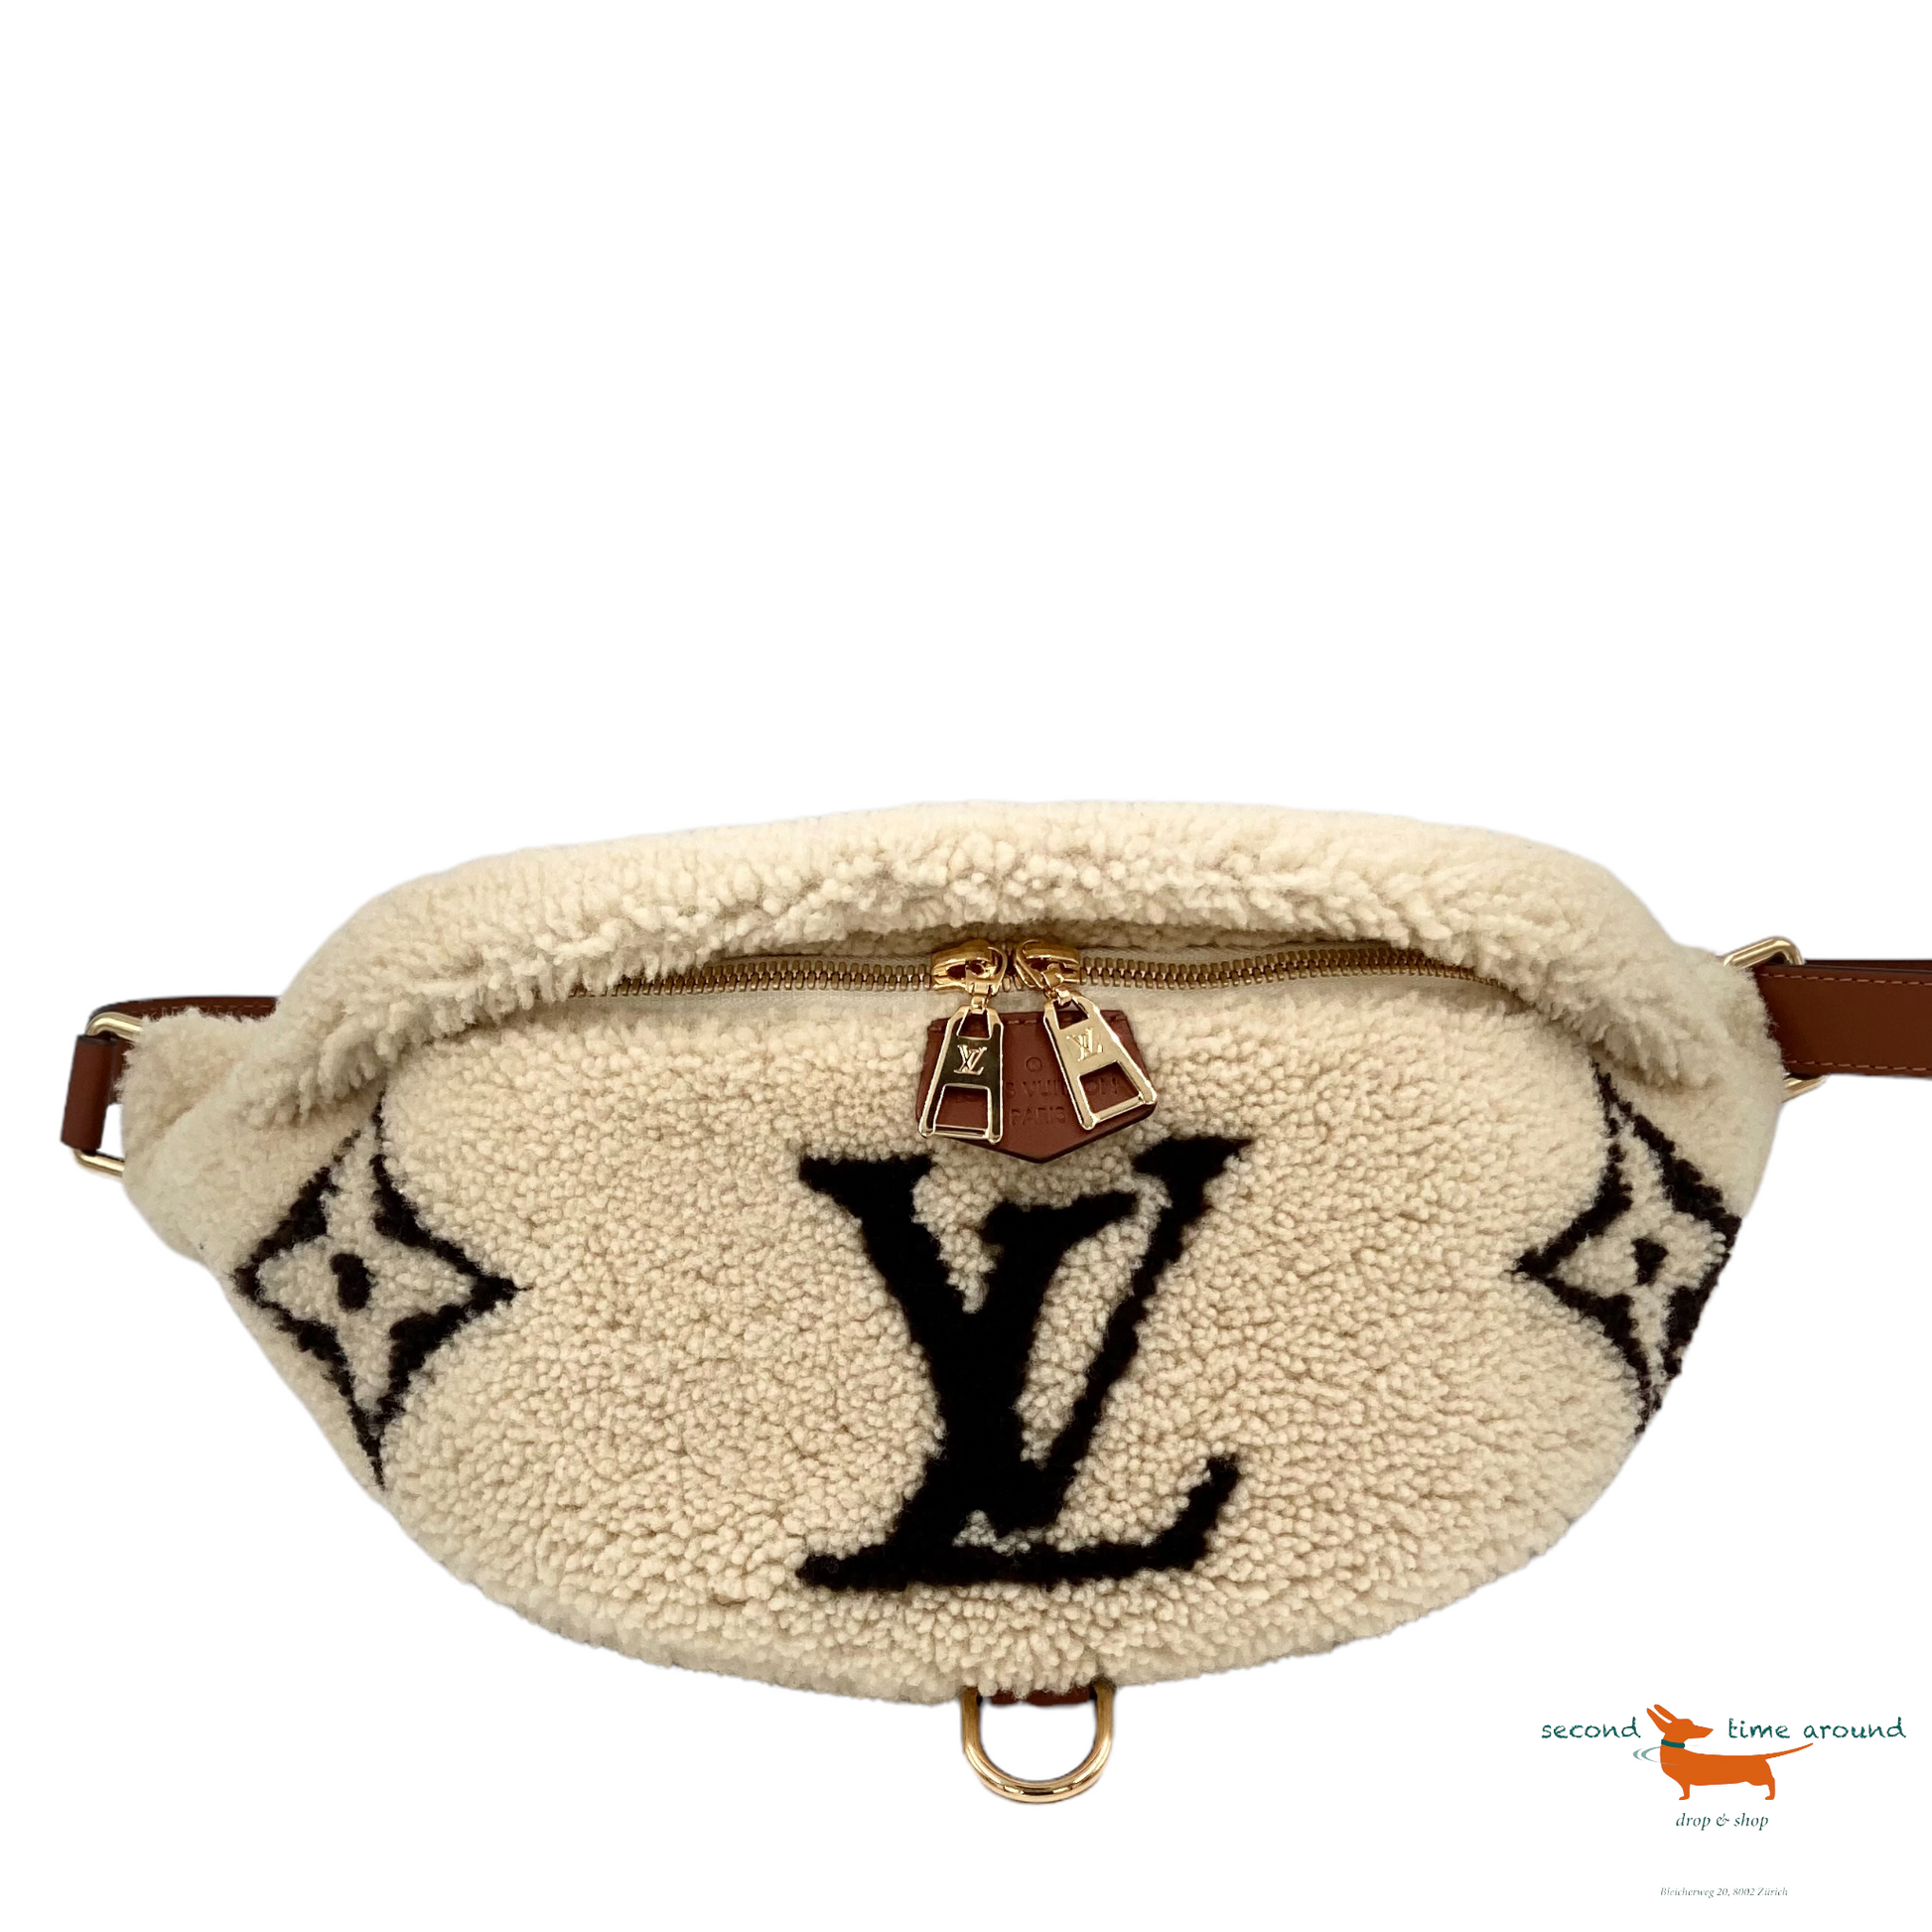 Limited Edition Louis Vuitton Teddy Bumbag